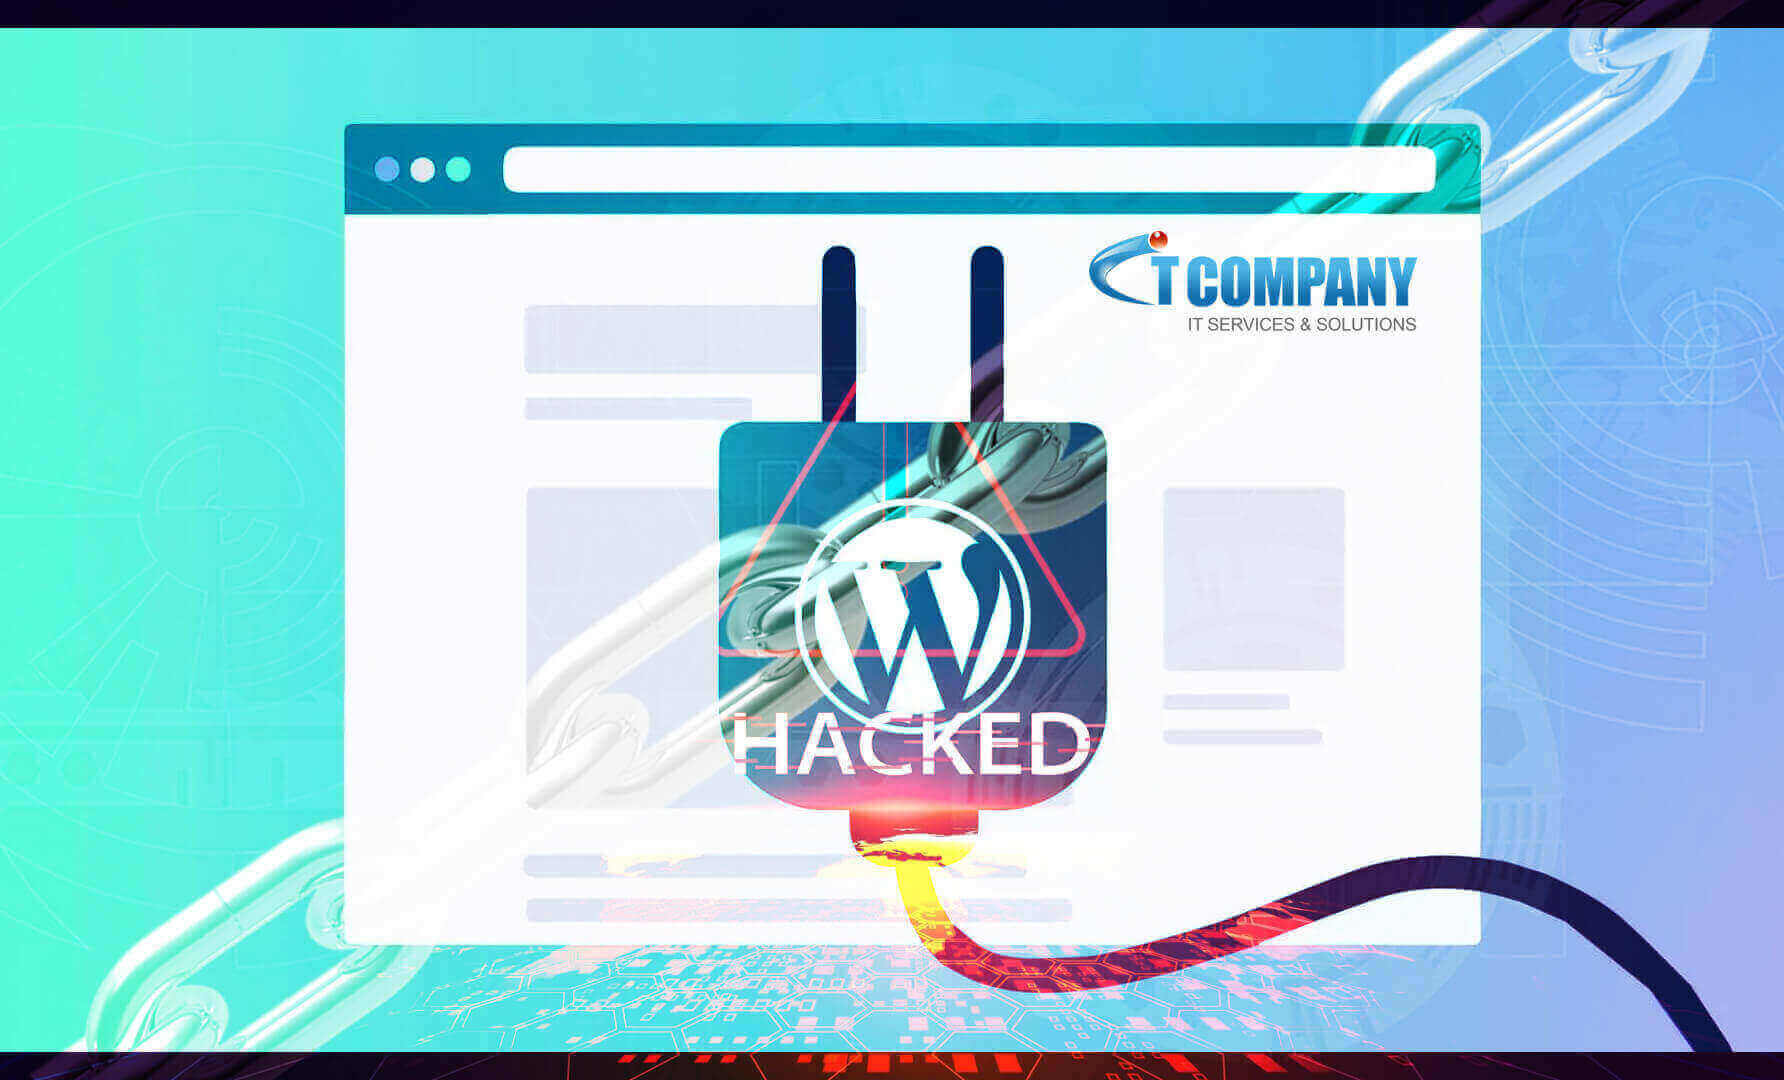 WordPress: Another significant plugin breach is targeting sites